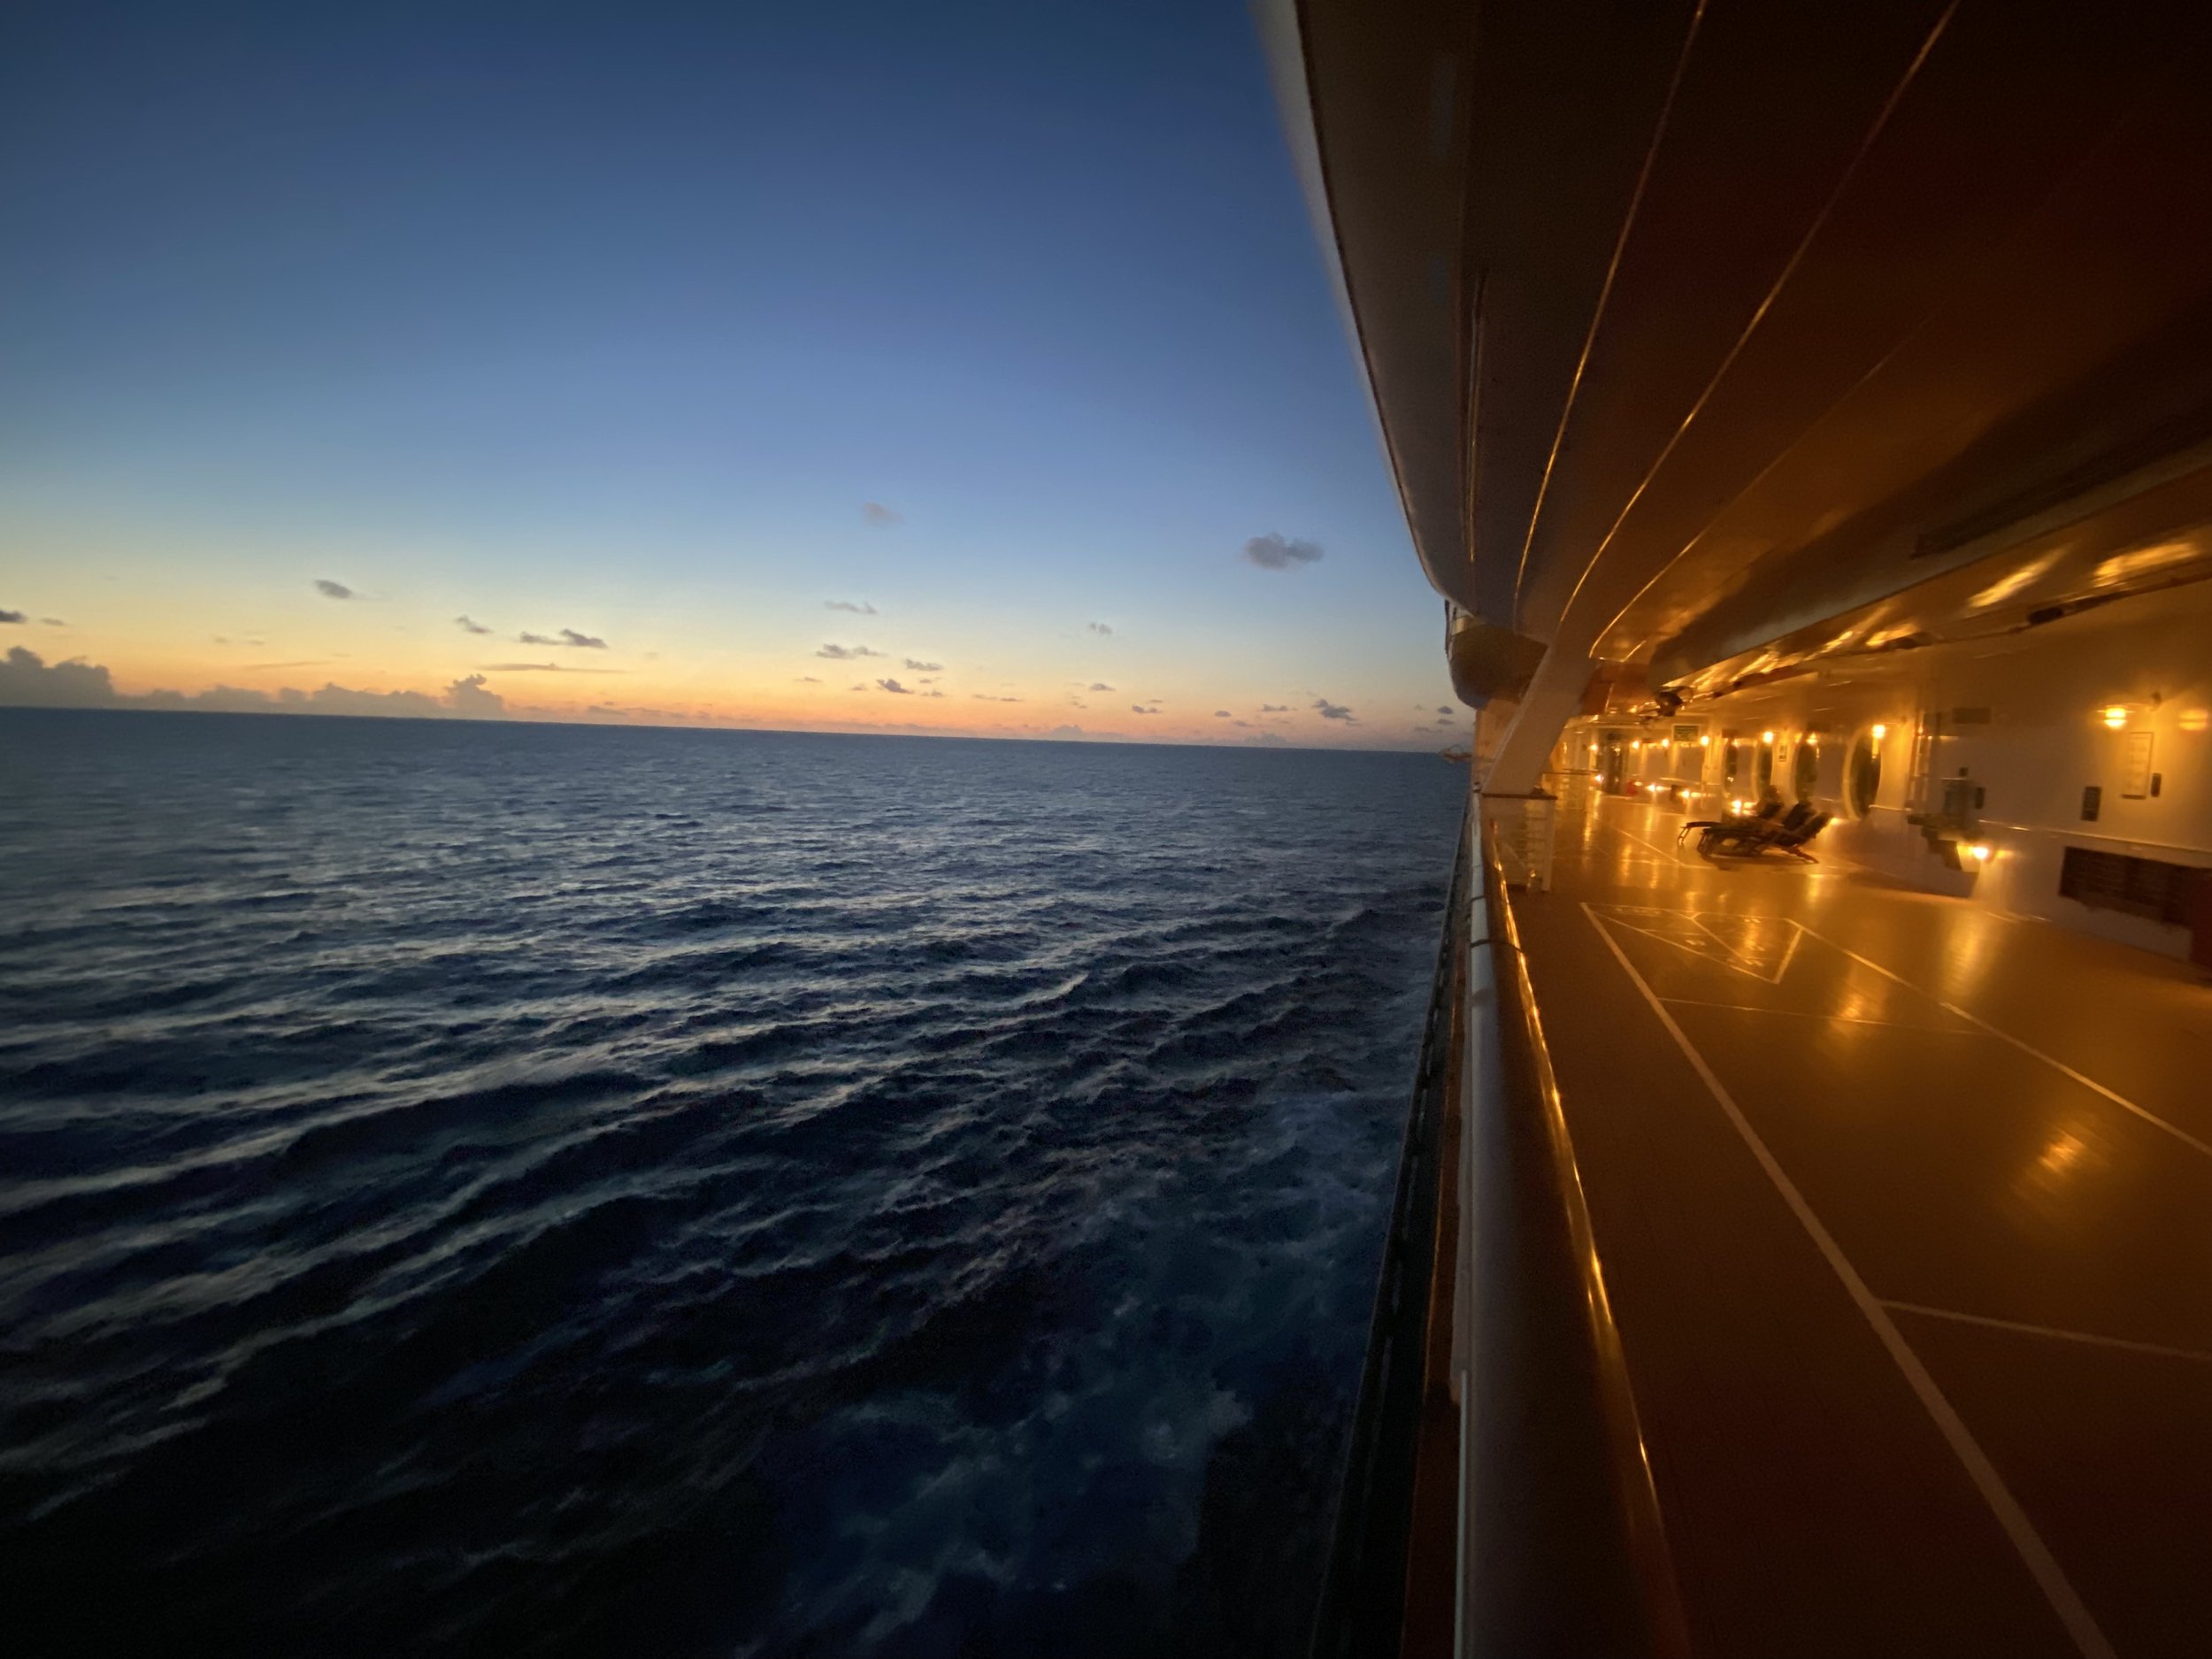  I love the promenade deck on the Disney Dream. It’s a great place to take a morning run or go for a walk during sunset. This was taken at sunrise over the Caribbean.  